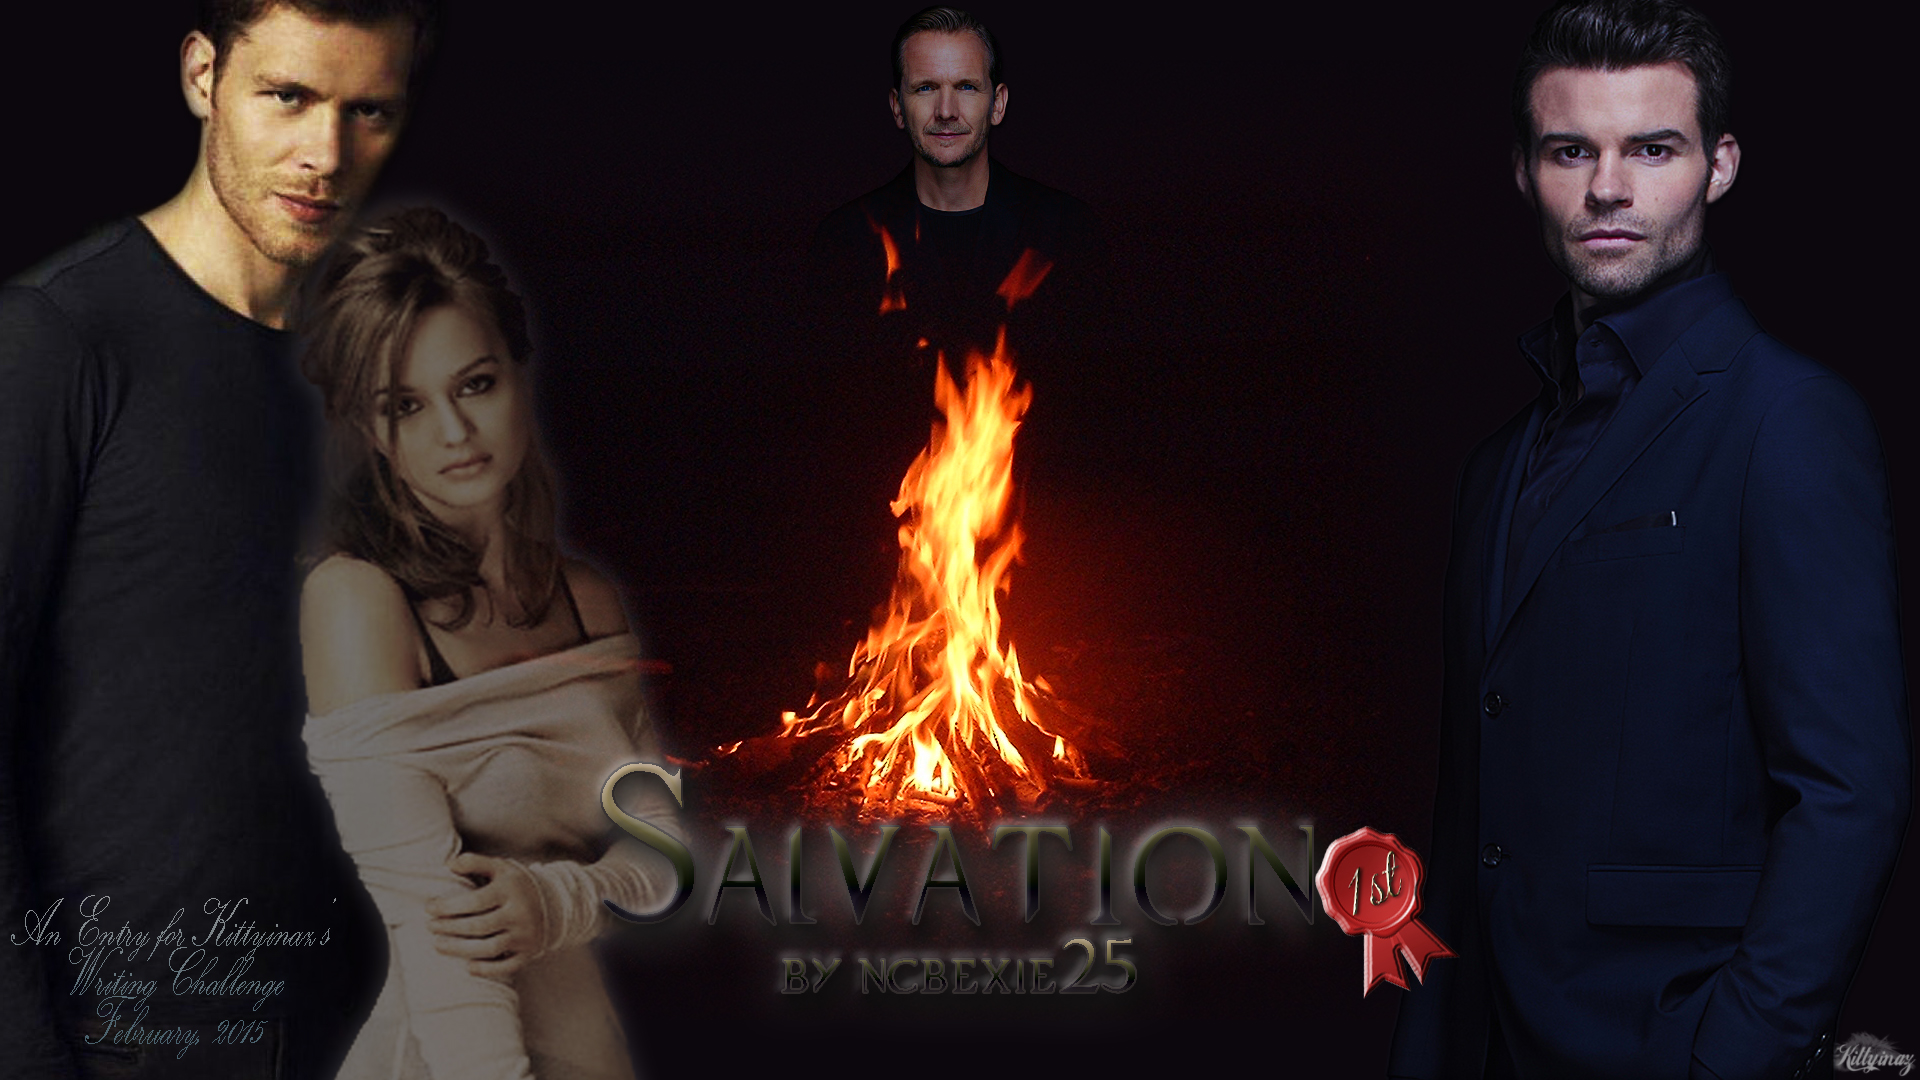 Salvation – Rated M by ncbexie25